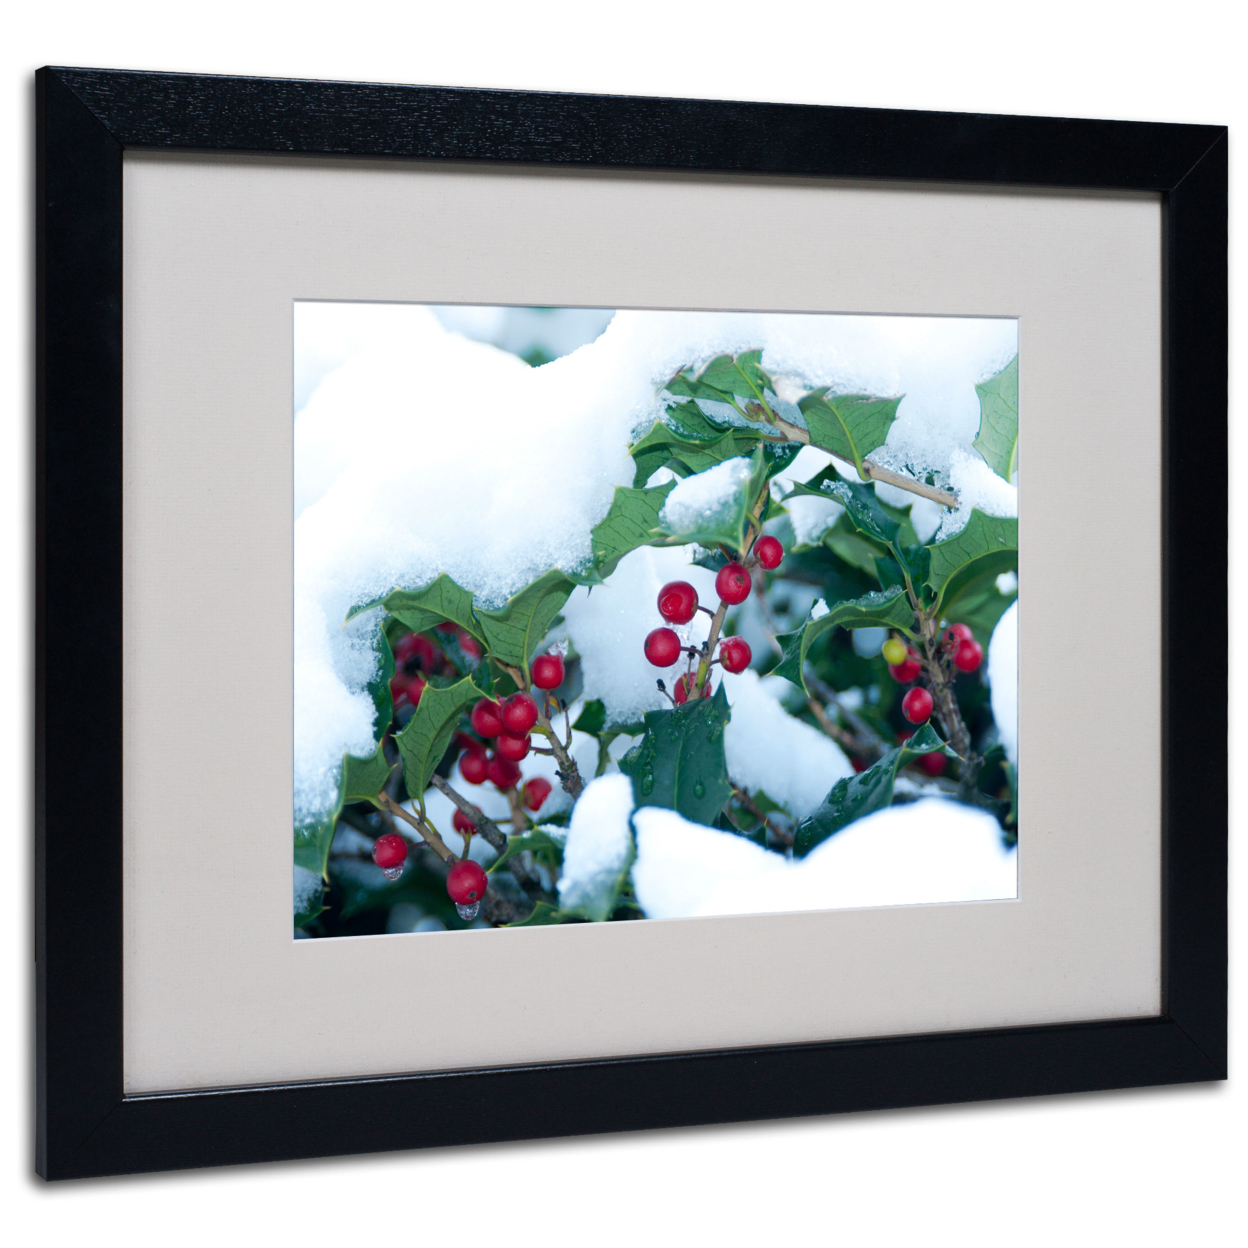 Kurt Shaffer 'Holly In The Snow' Black Wooden Framed Art 18 X 22 Inches